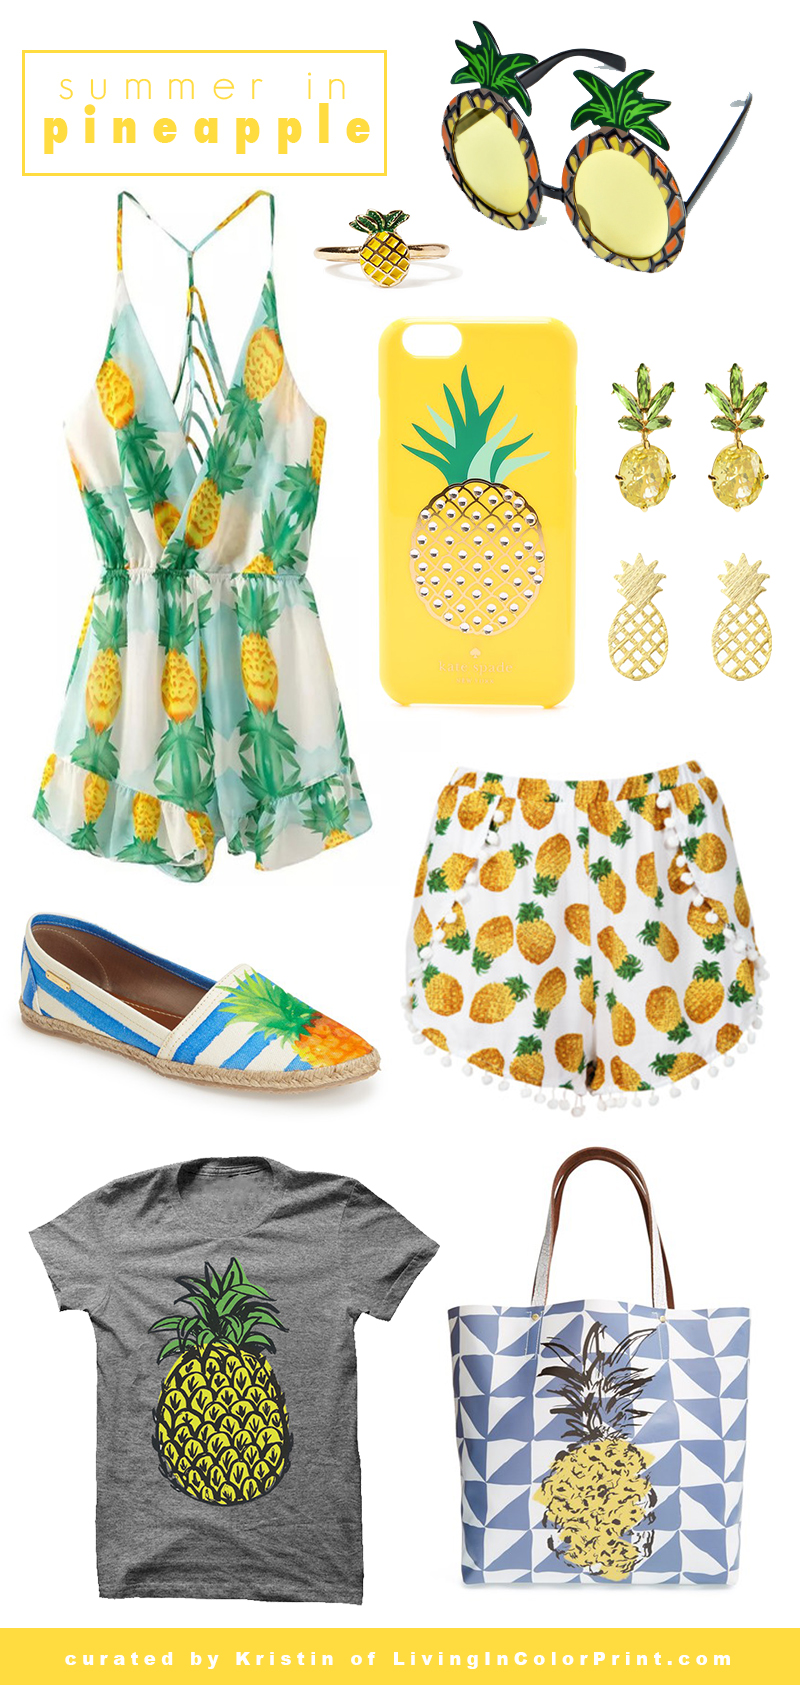 pineapple-summer-fashion-trends